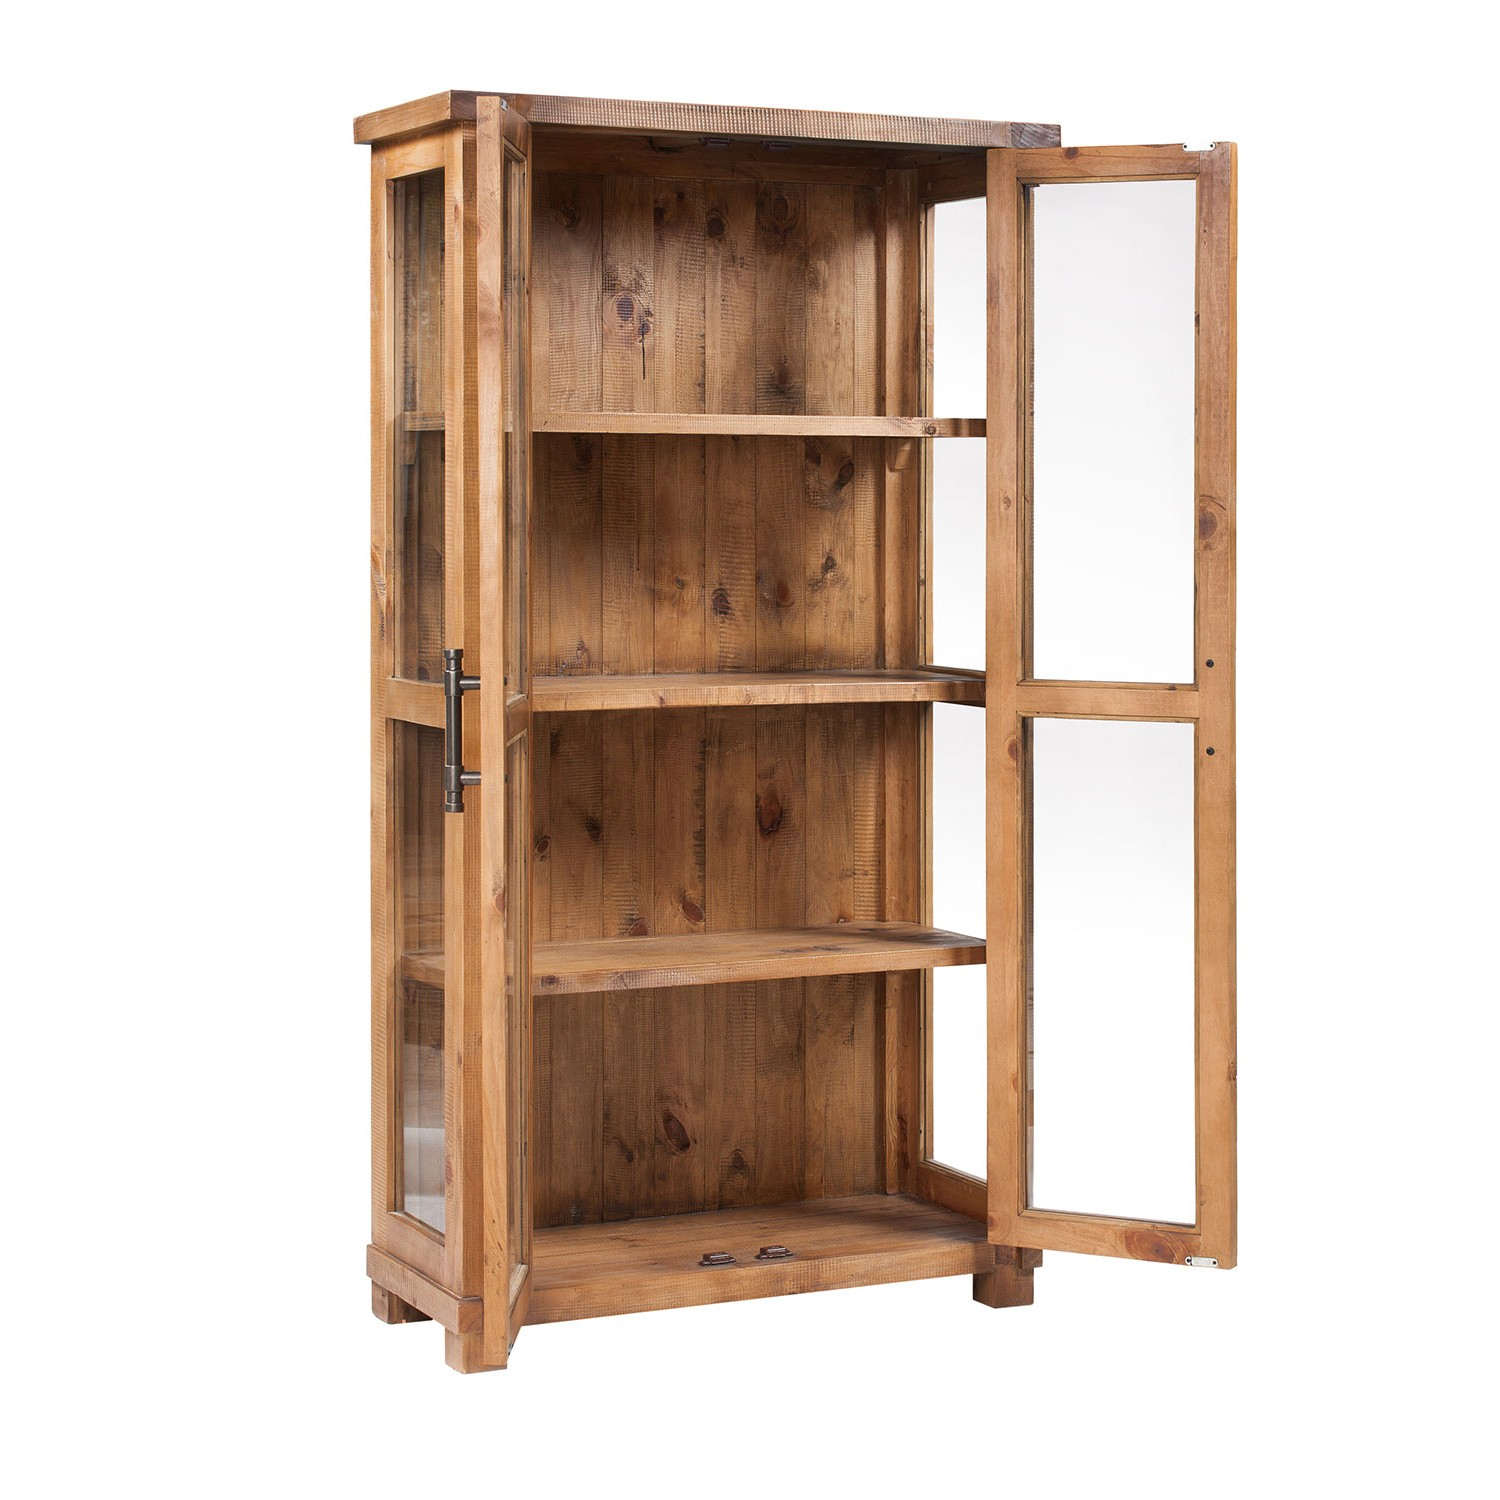 Country Glass Display Cabinet W Doors 391773 Pine Woodfinish in size 1500 X 1500